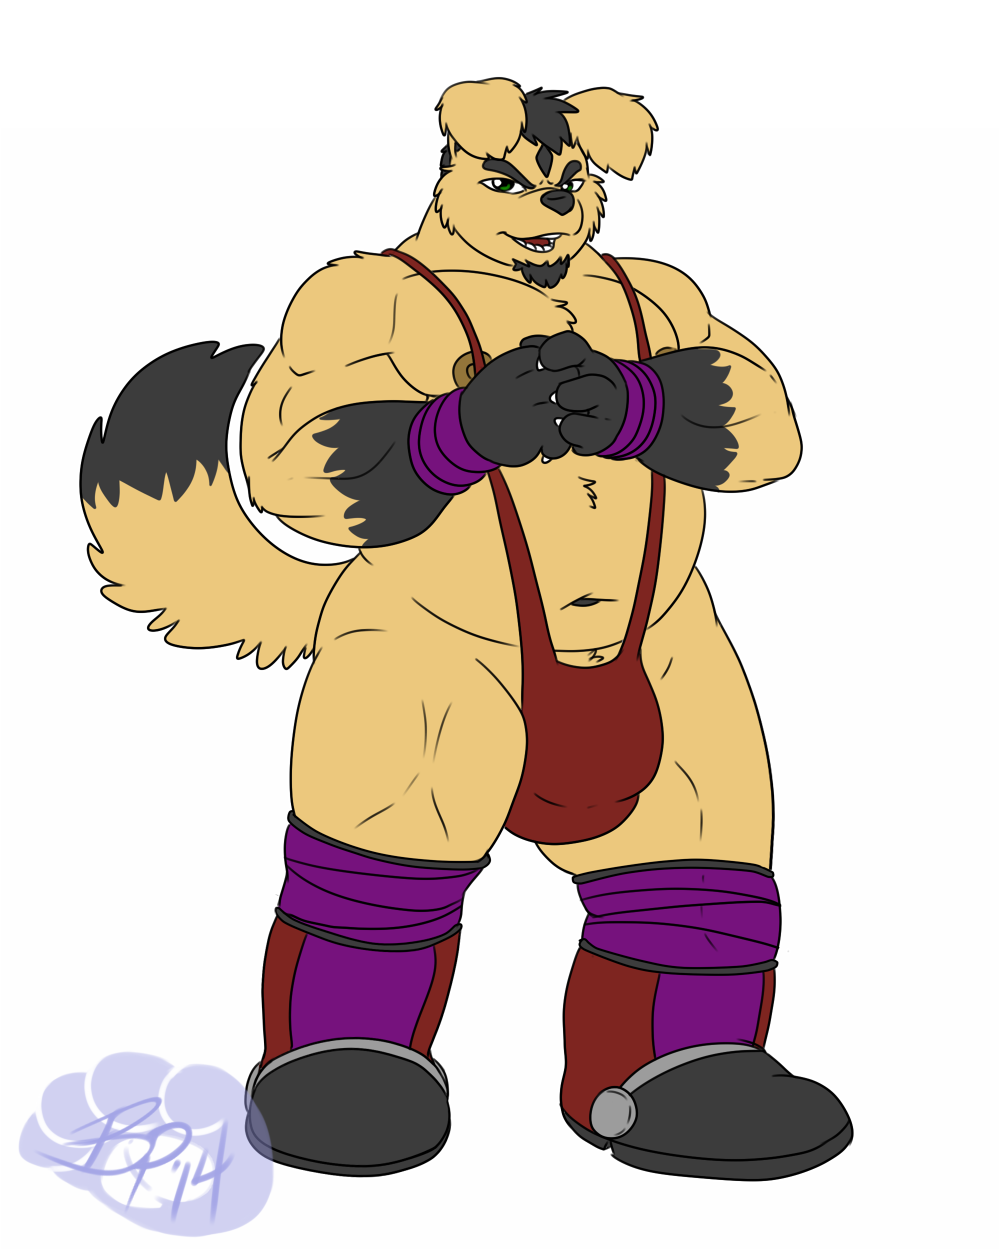 Most recent image: [Character] Justin the Wrestler